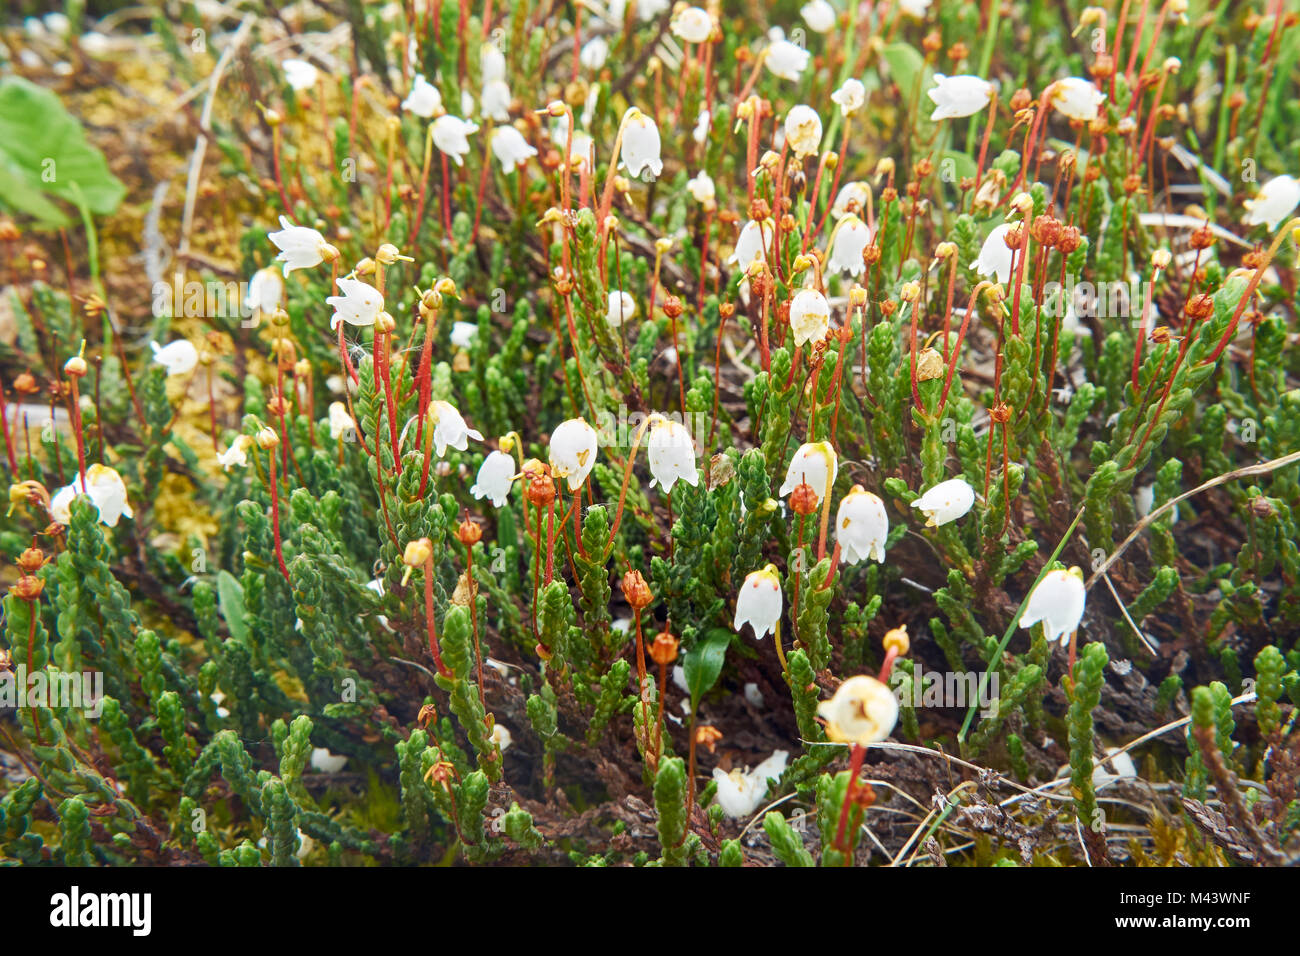 Flower Arctic bell-heather - Cassiope tetragona in natural tundra environment Stock Photo